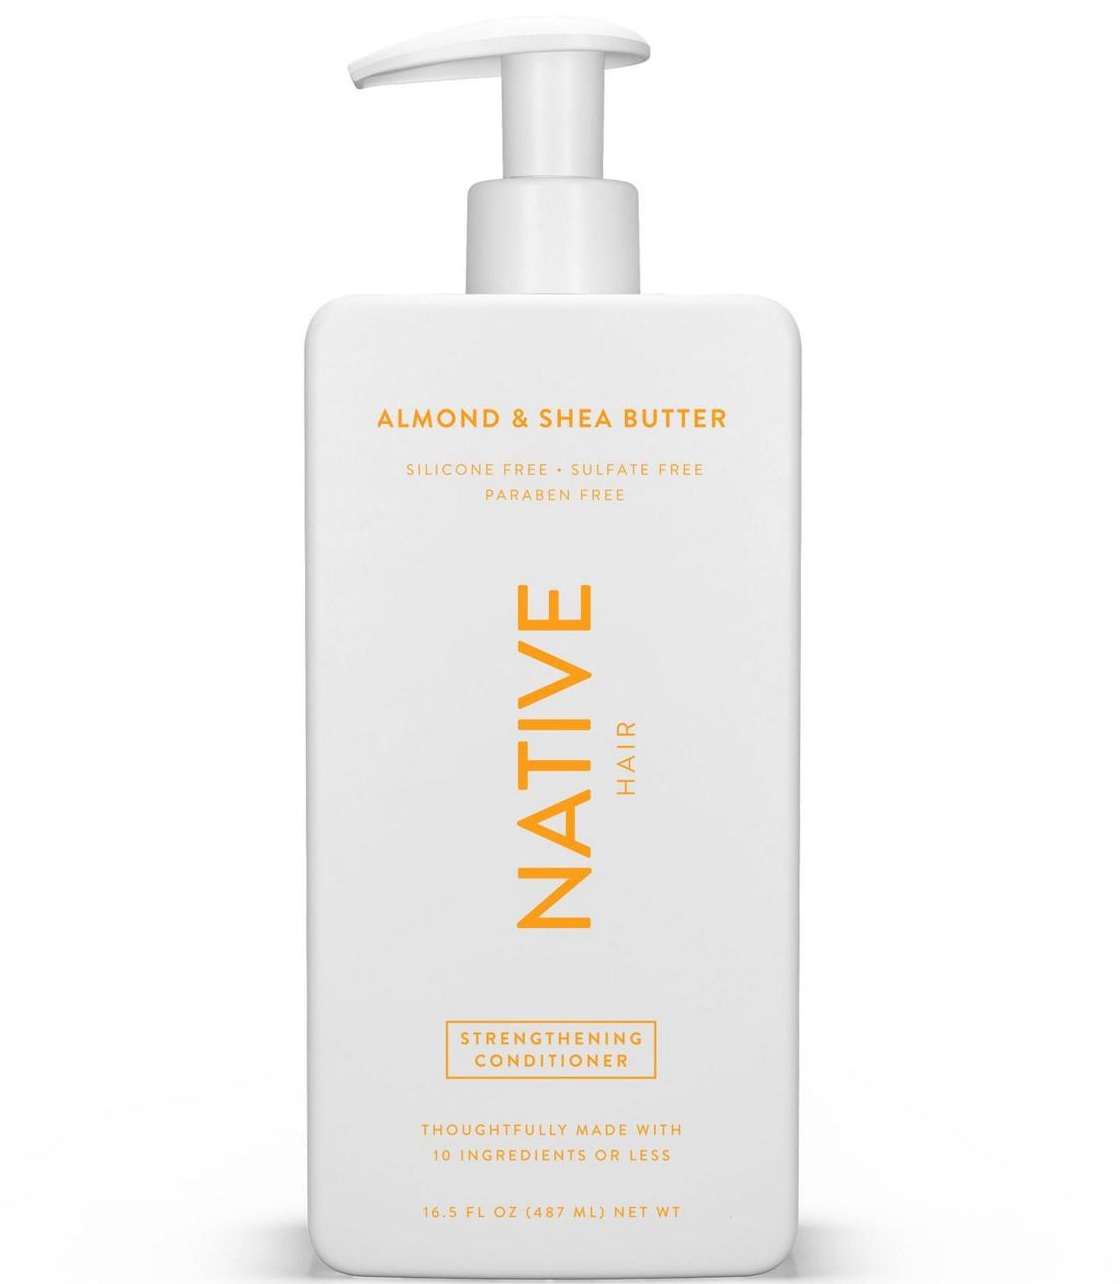 Native Almond & Shea Butter Strengthening Conditioner